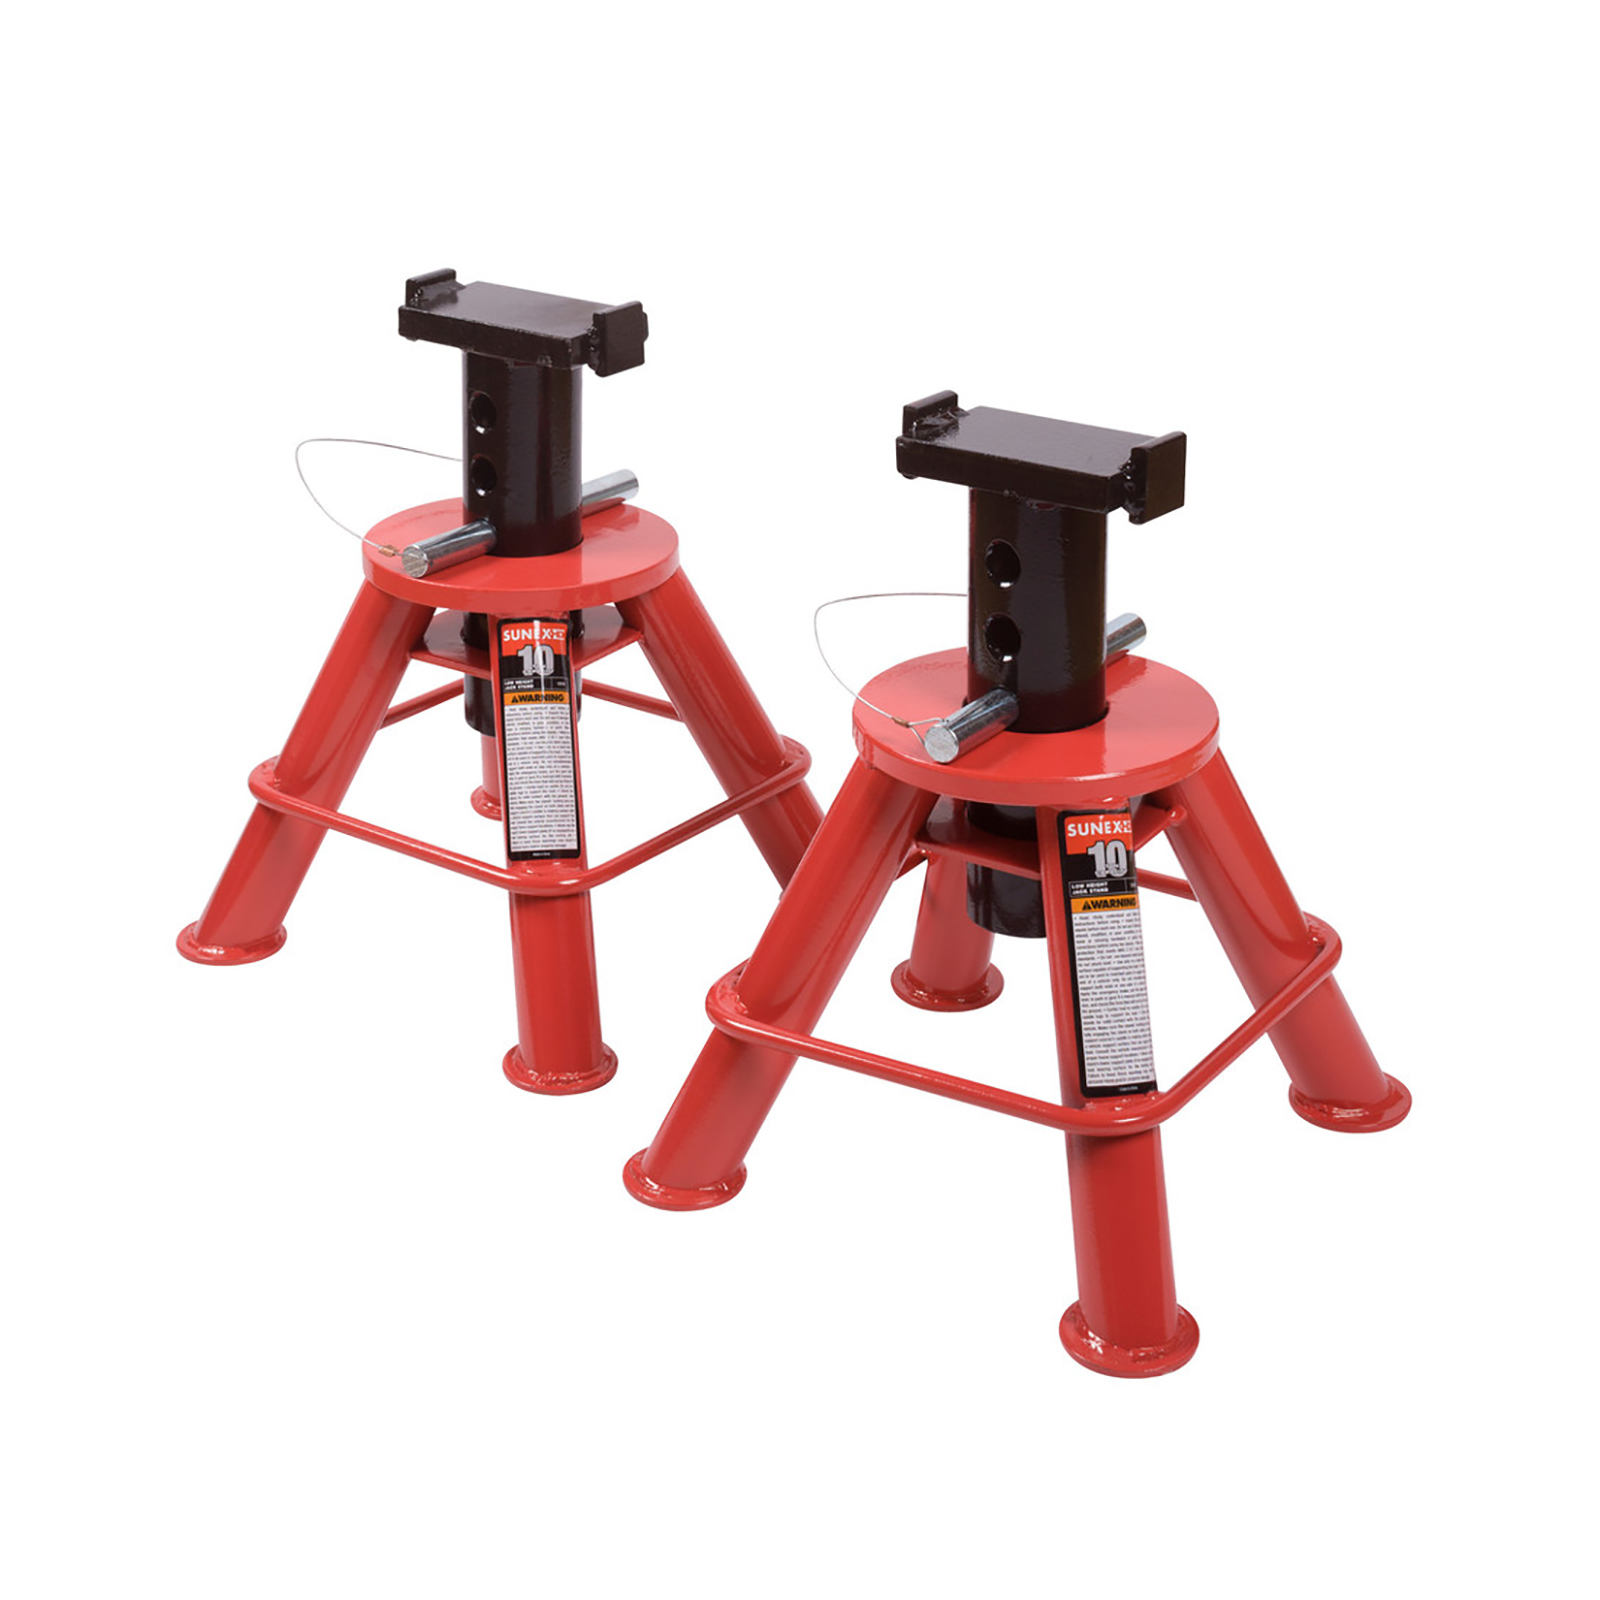 Sunex Set of 2 Low Height 10 ton Pin Type Jack Stands